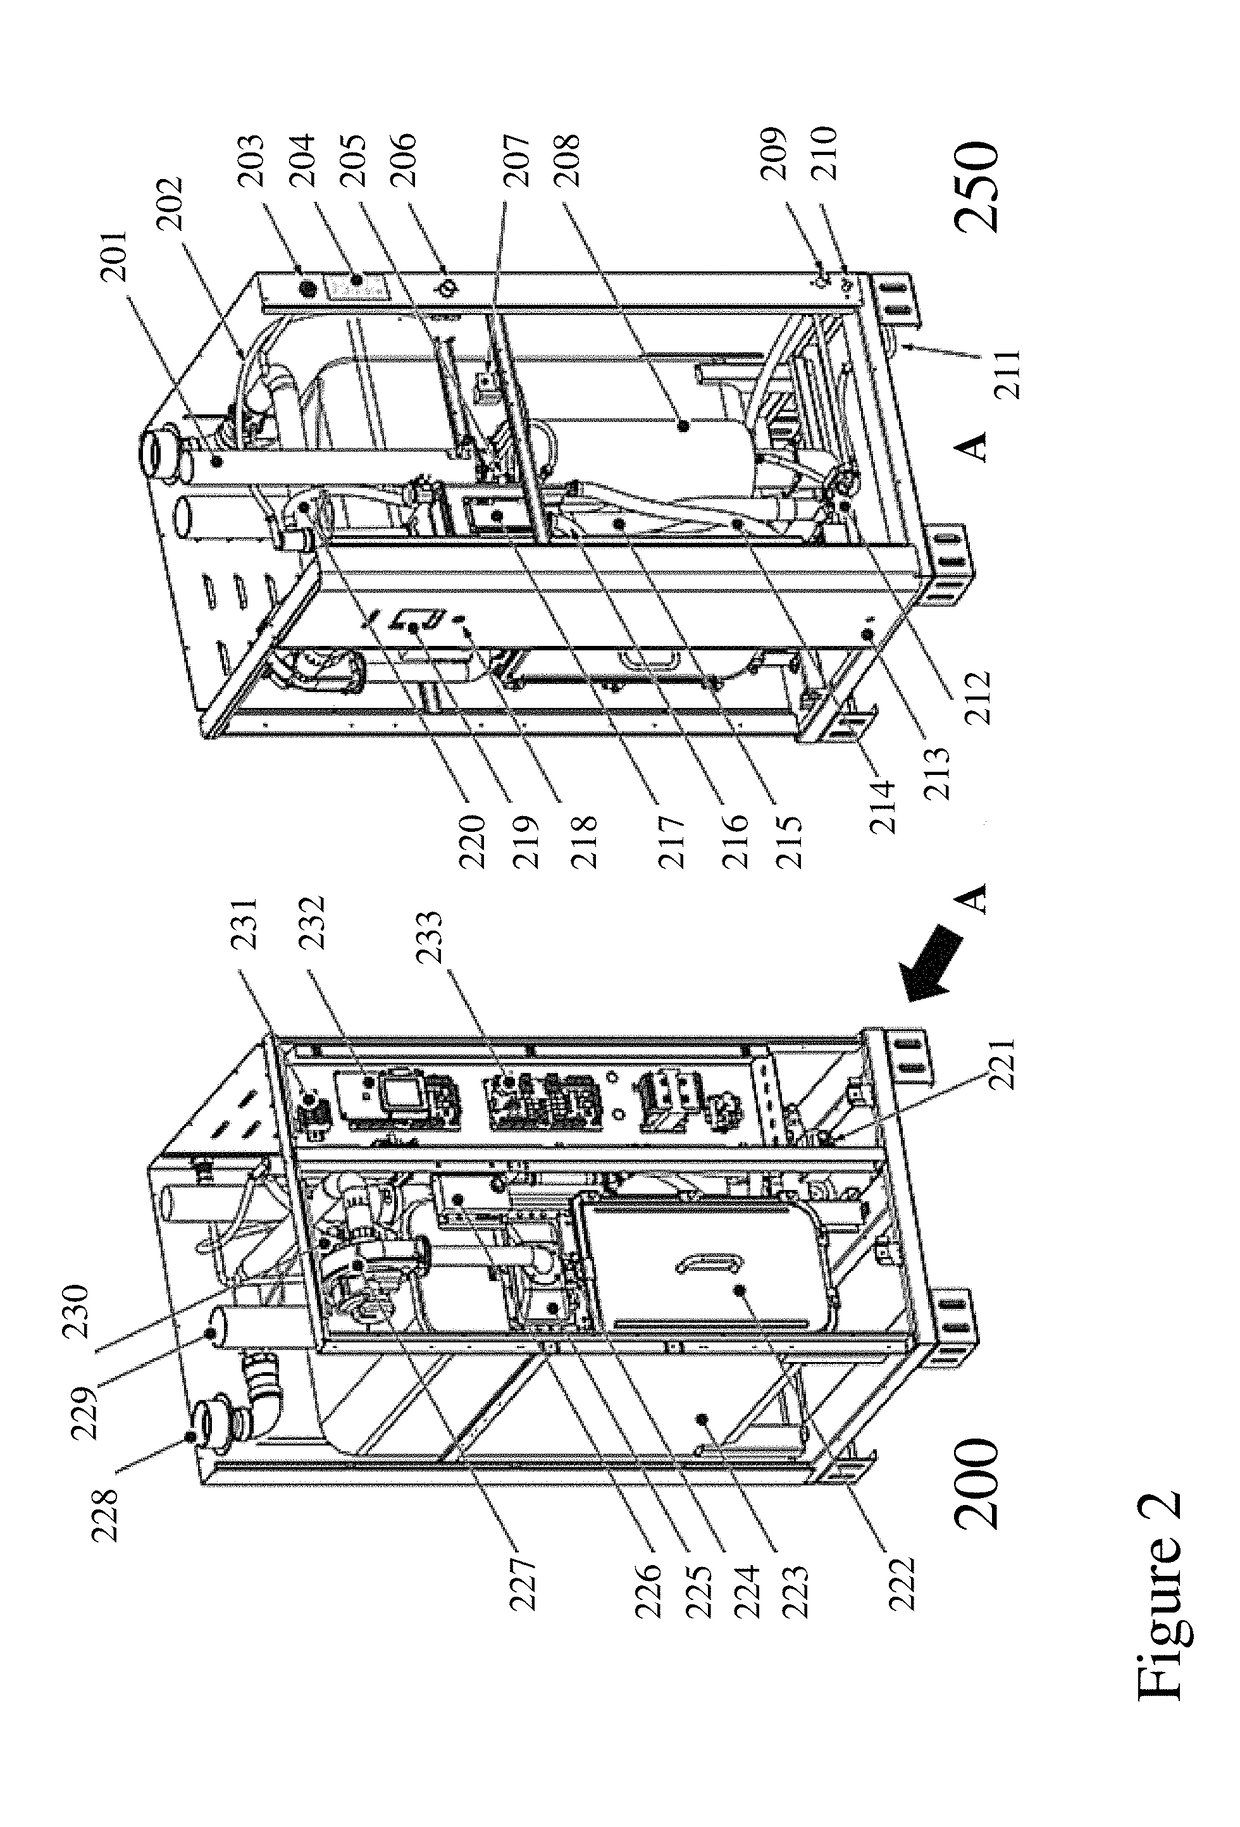 Dual-stage humidifier methods and systems